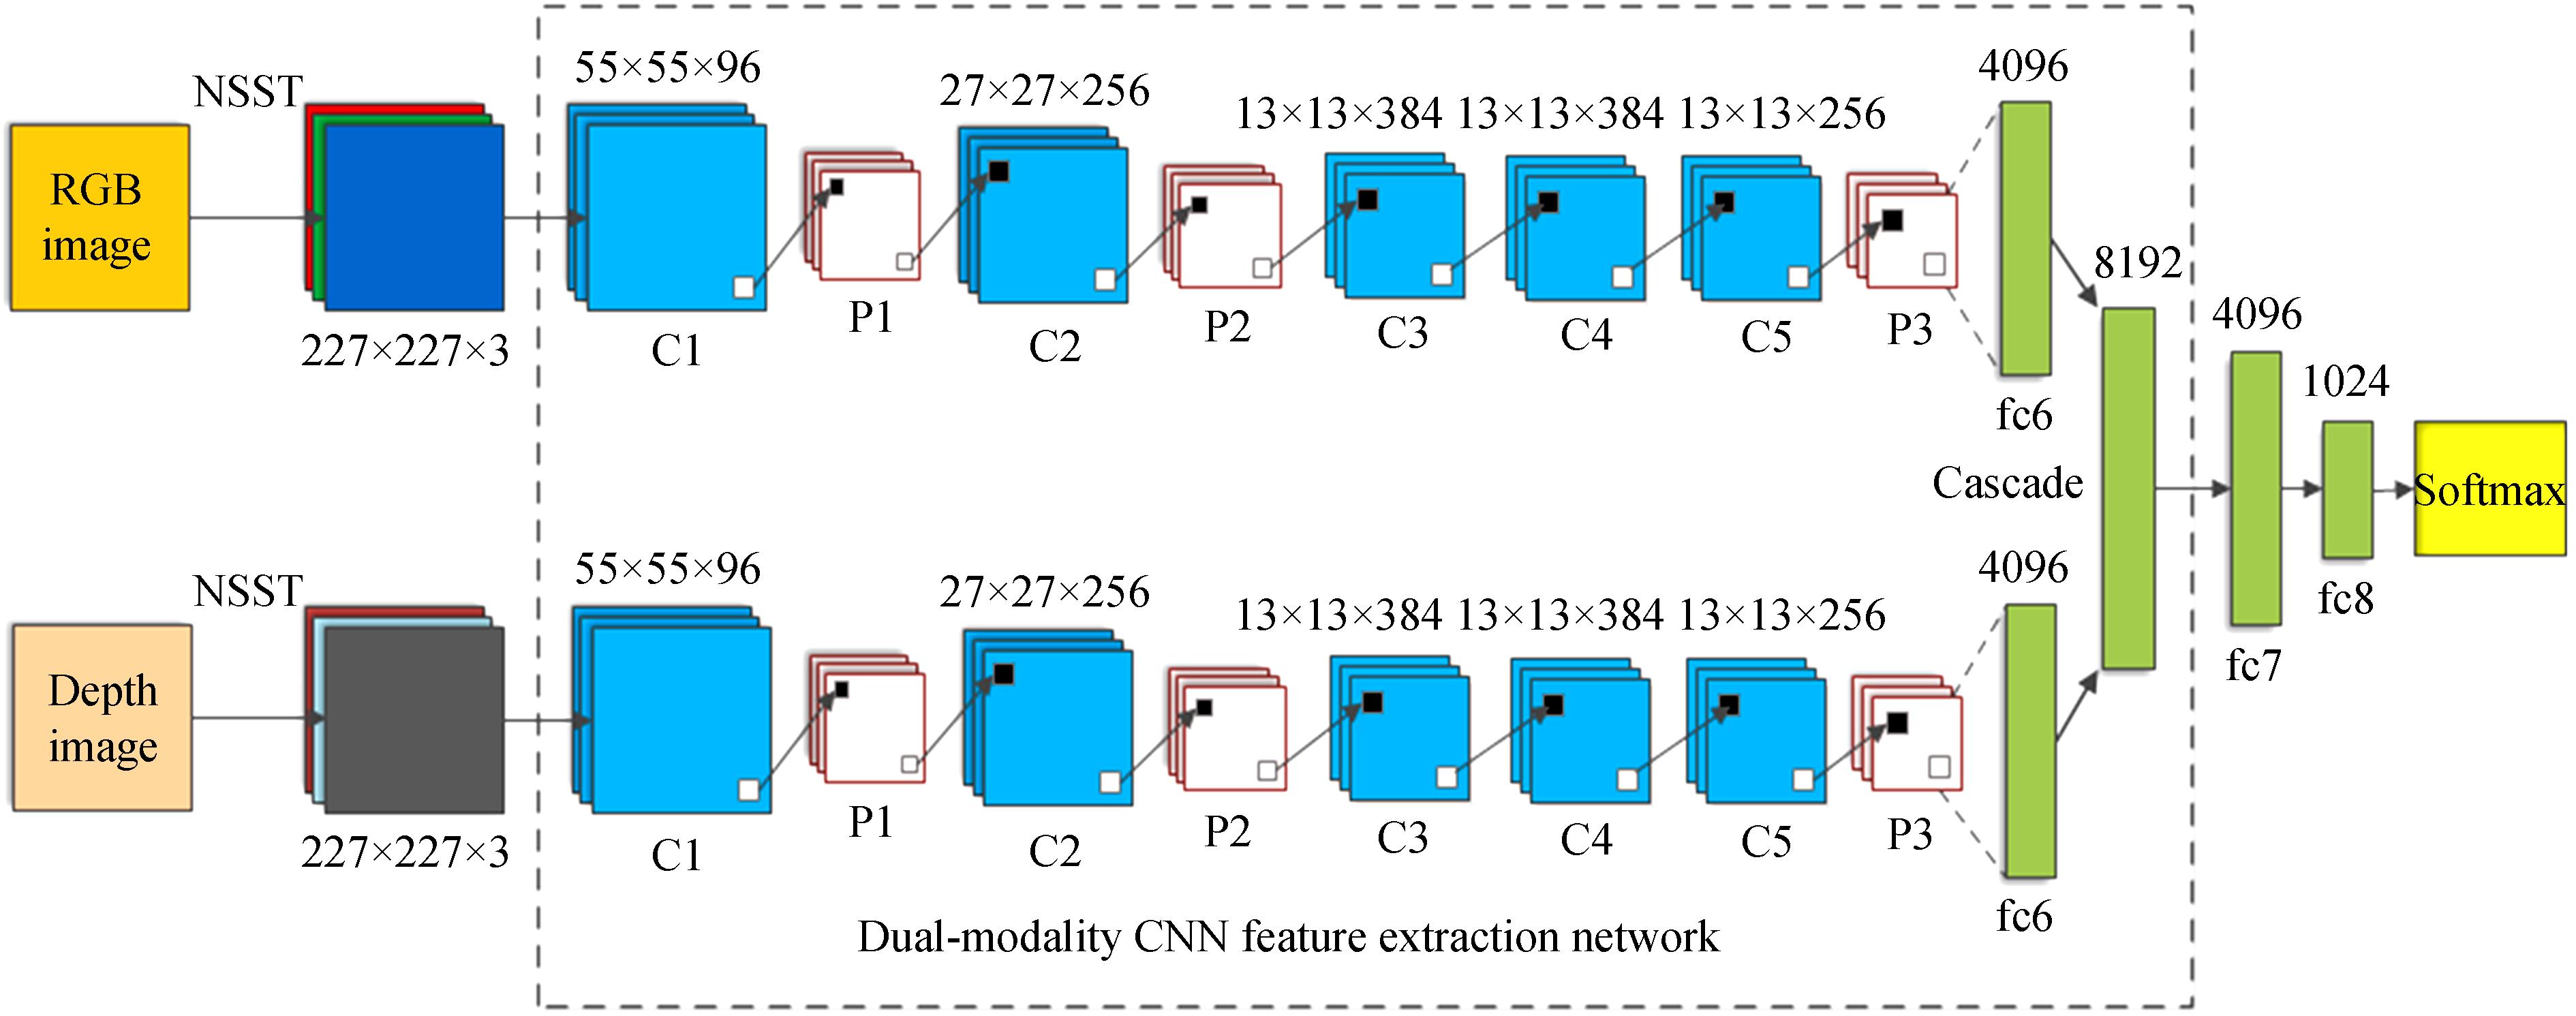 Dual-modality CNN feature extraction and recognition model